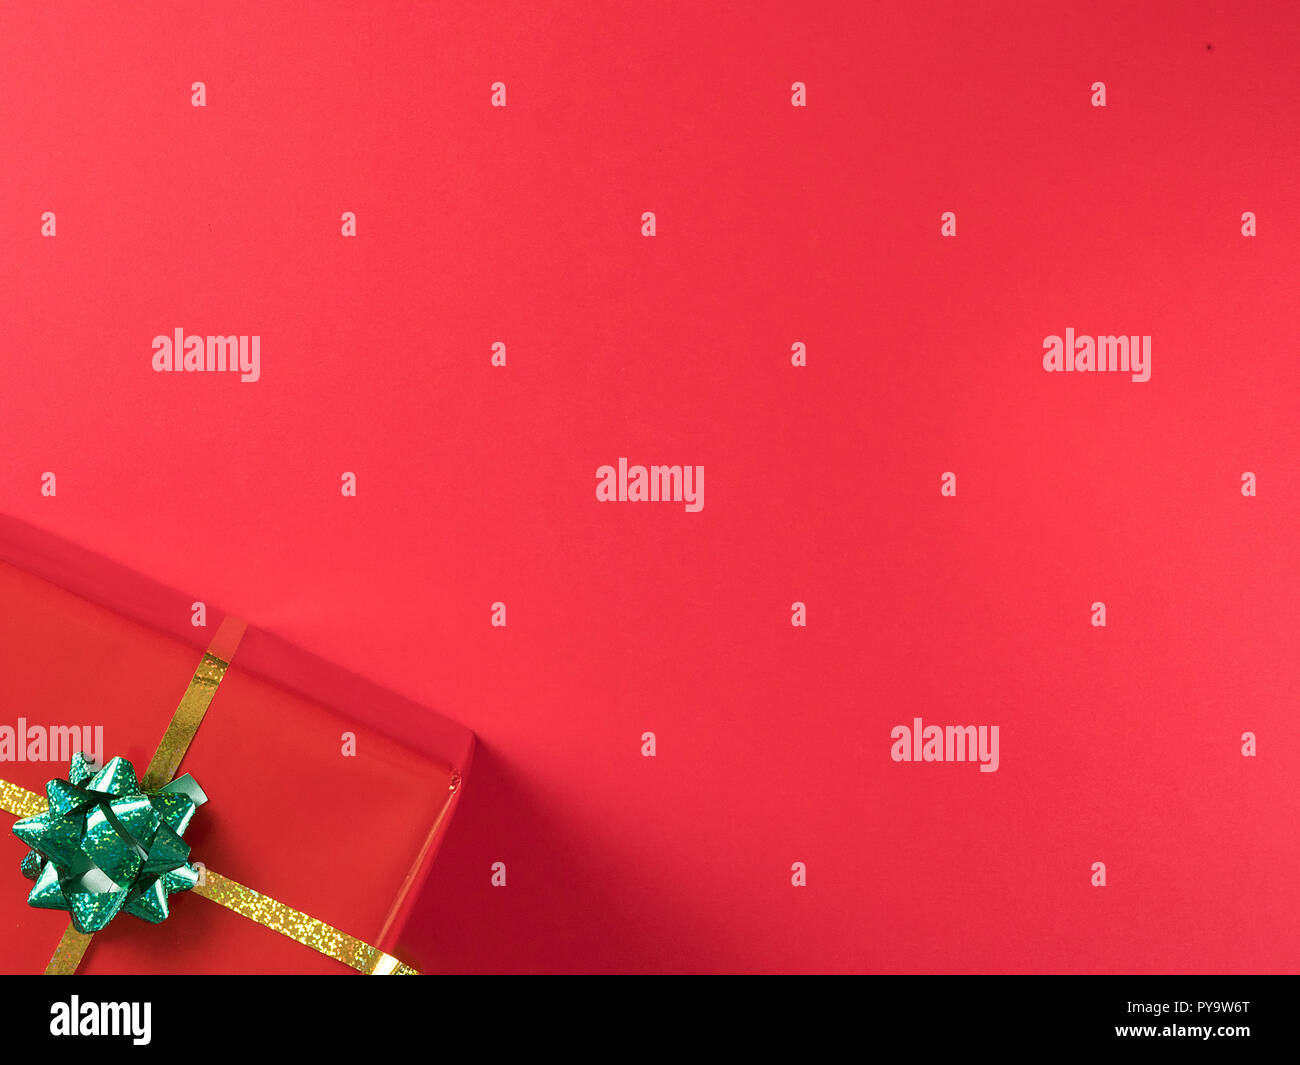 Beautiful Christmas red gif boxe on red background. Elegance style Stock Photo